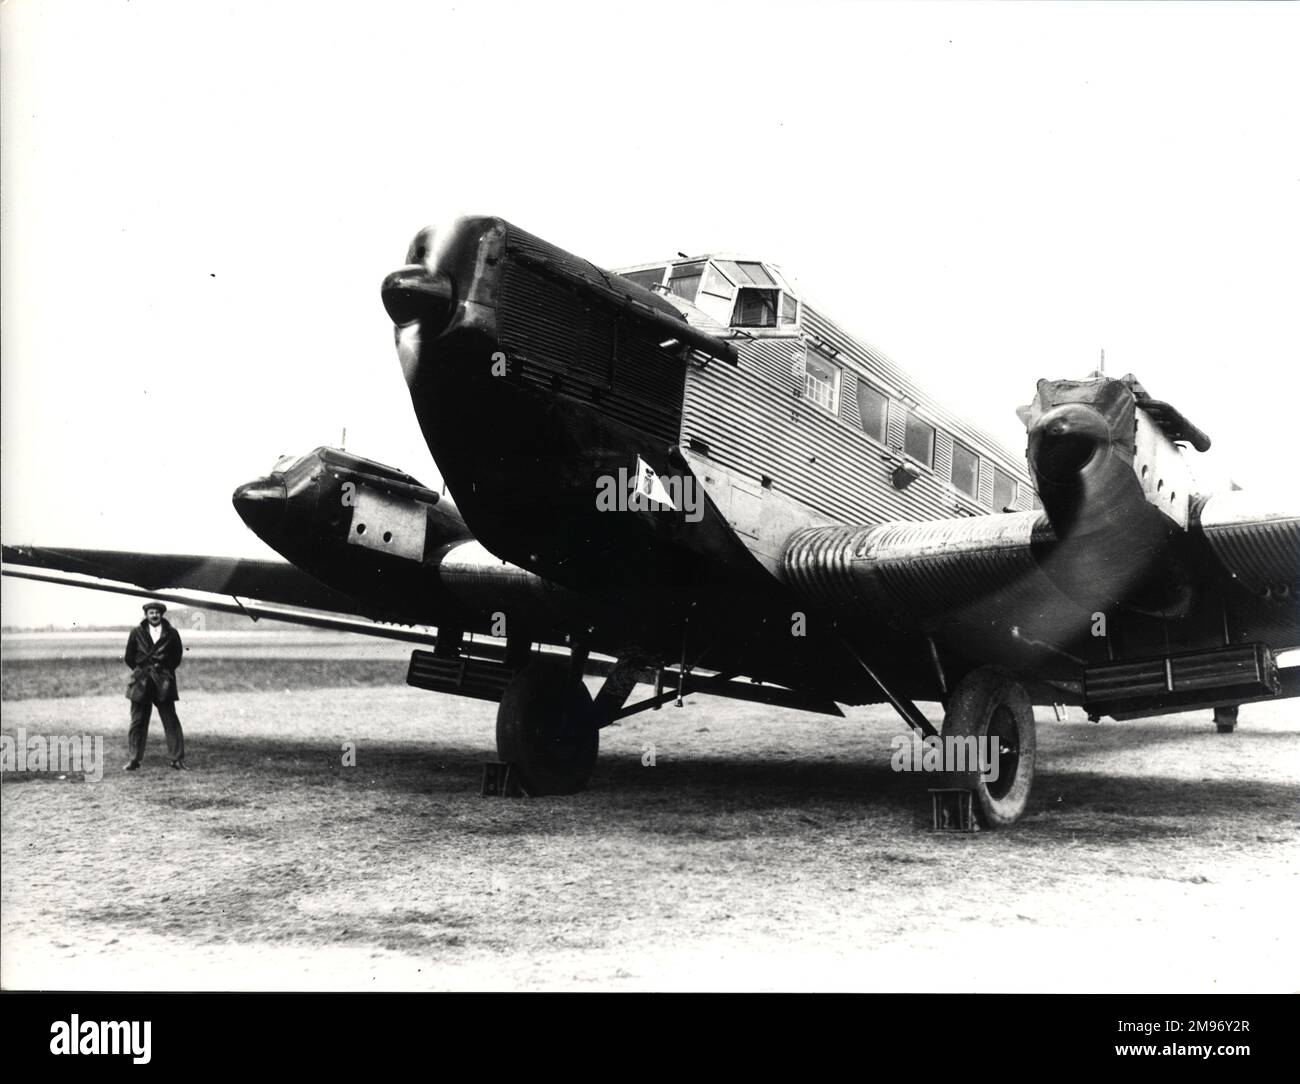 Junkers Ju52/3m powered by Hispano-Suiza engines. Stock Photo